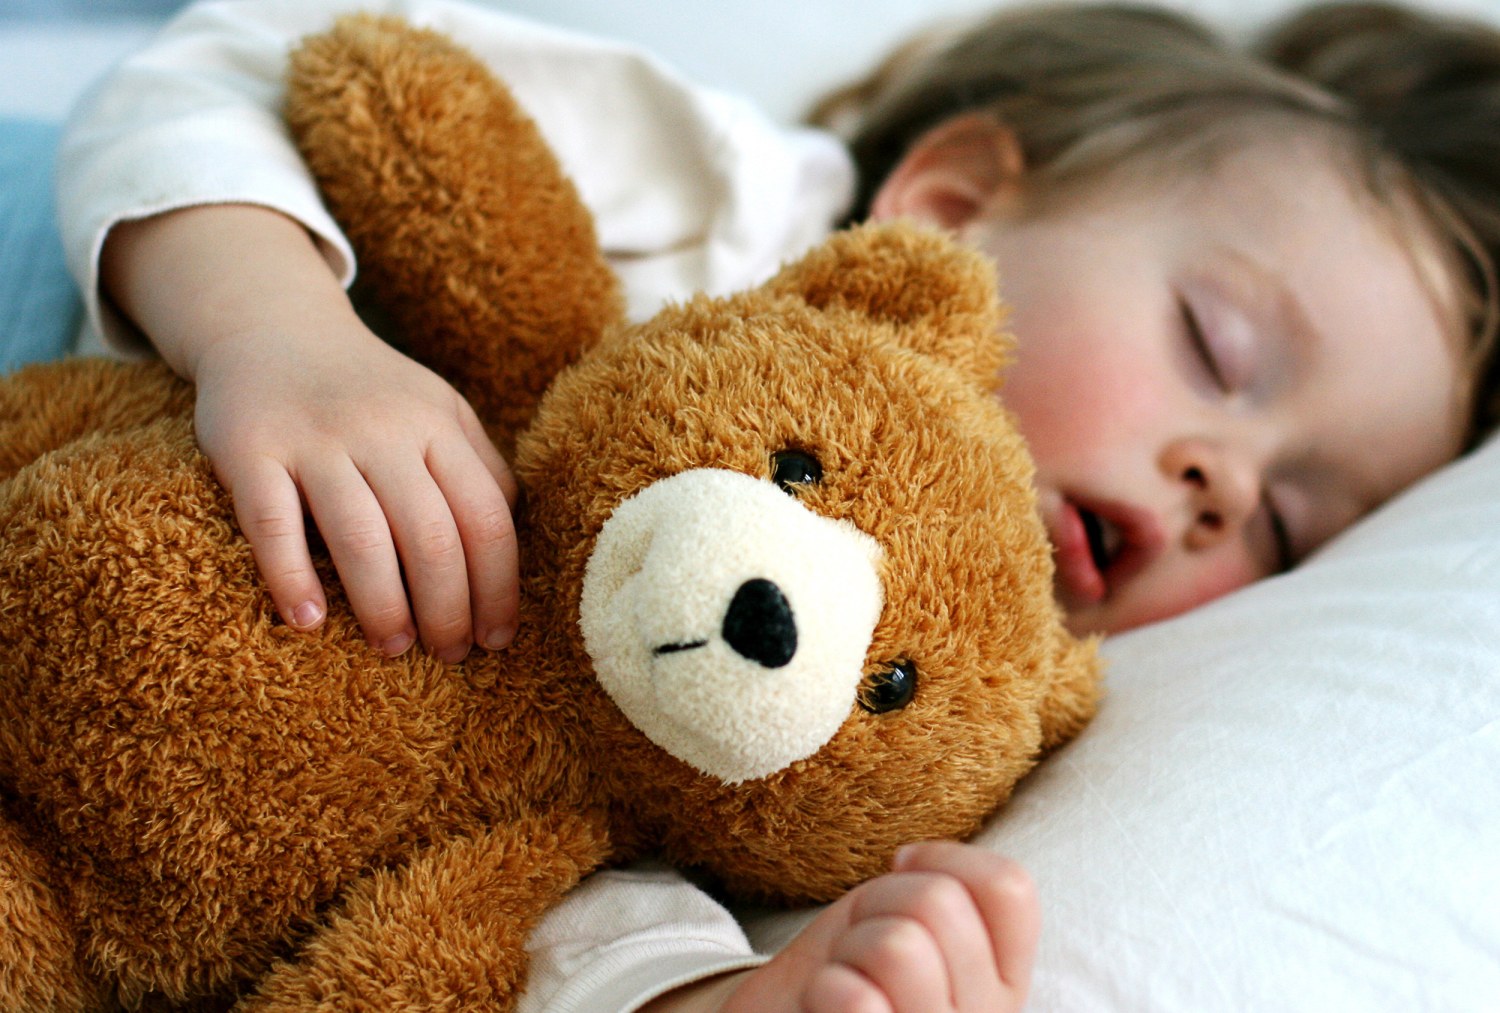 Sleeping with a stuffed animal as an adult is OK, experts say